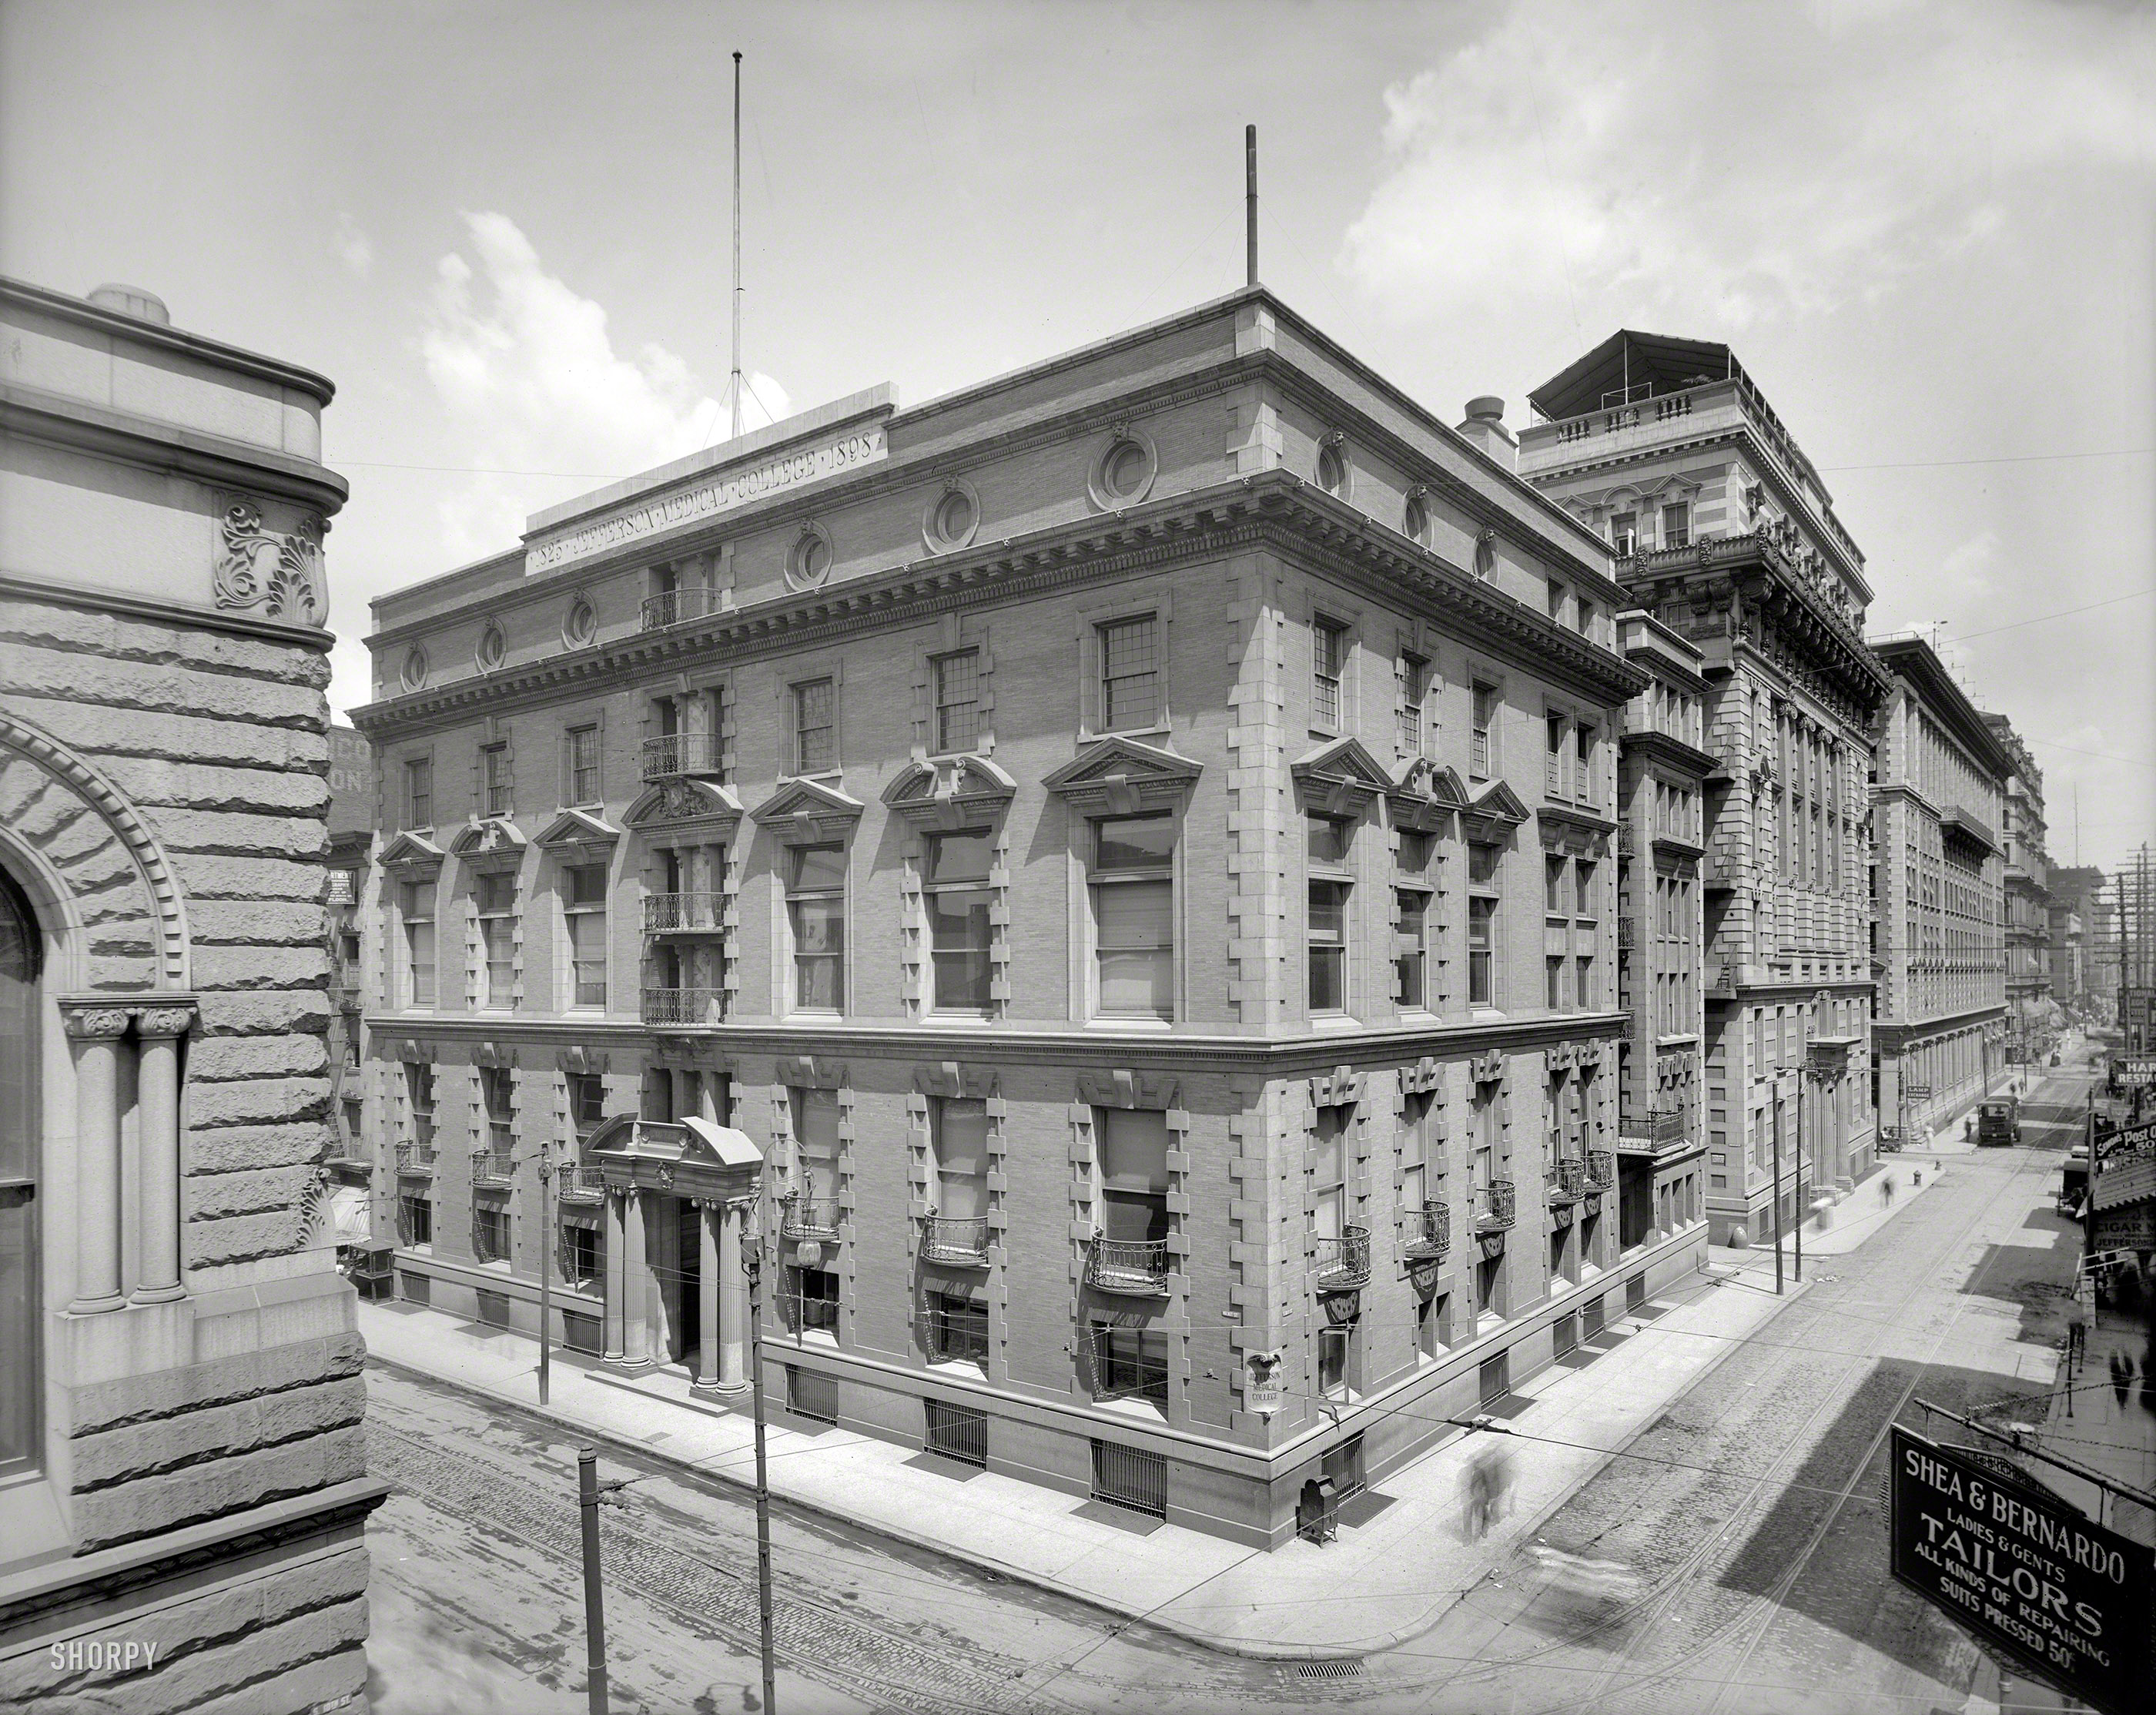 Philadelphia circa 1909. "Jefferson Medical College and Hospital, 10th Street." Another of Detroit Publishing's hyper-detailed corner views, complete with requisite ghost pedestrian. 8x10 inch glass negative. View full size.